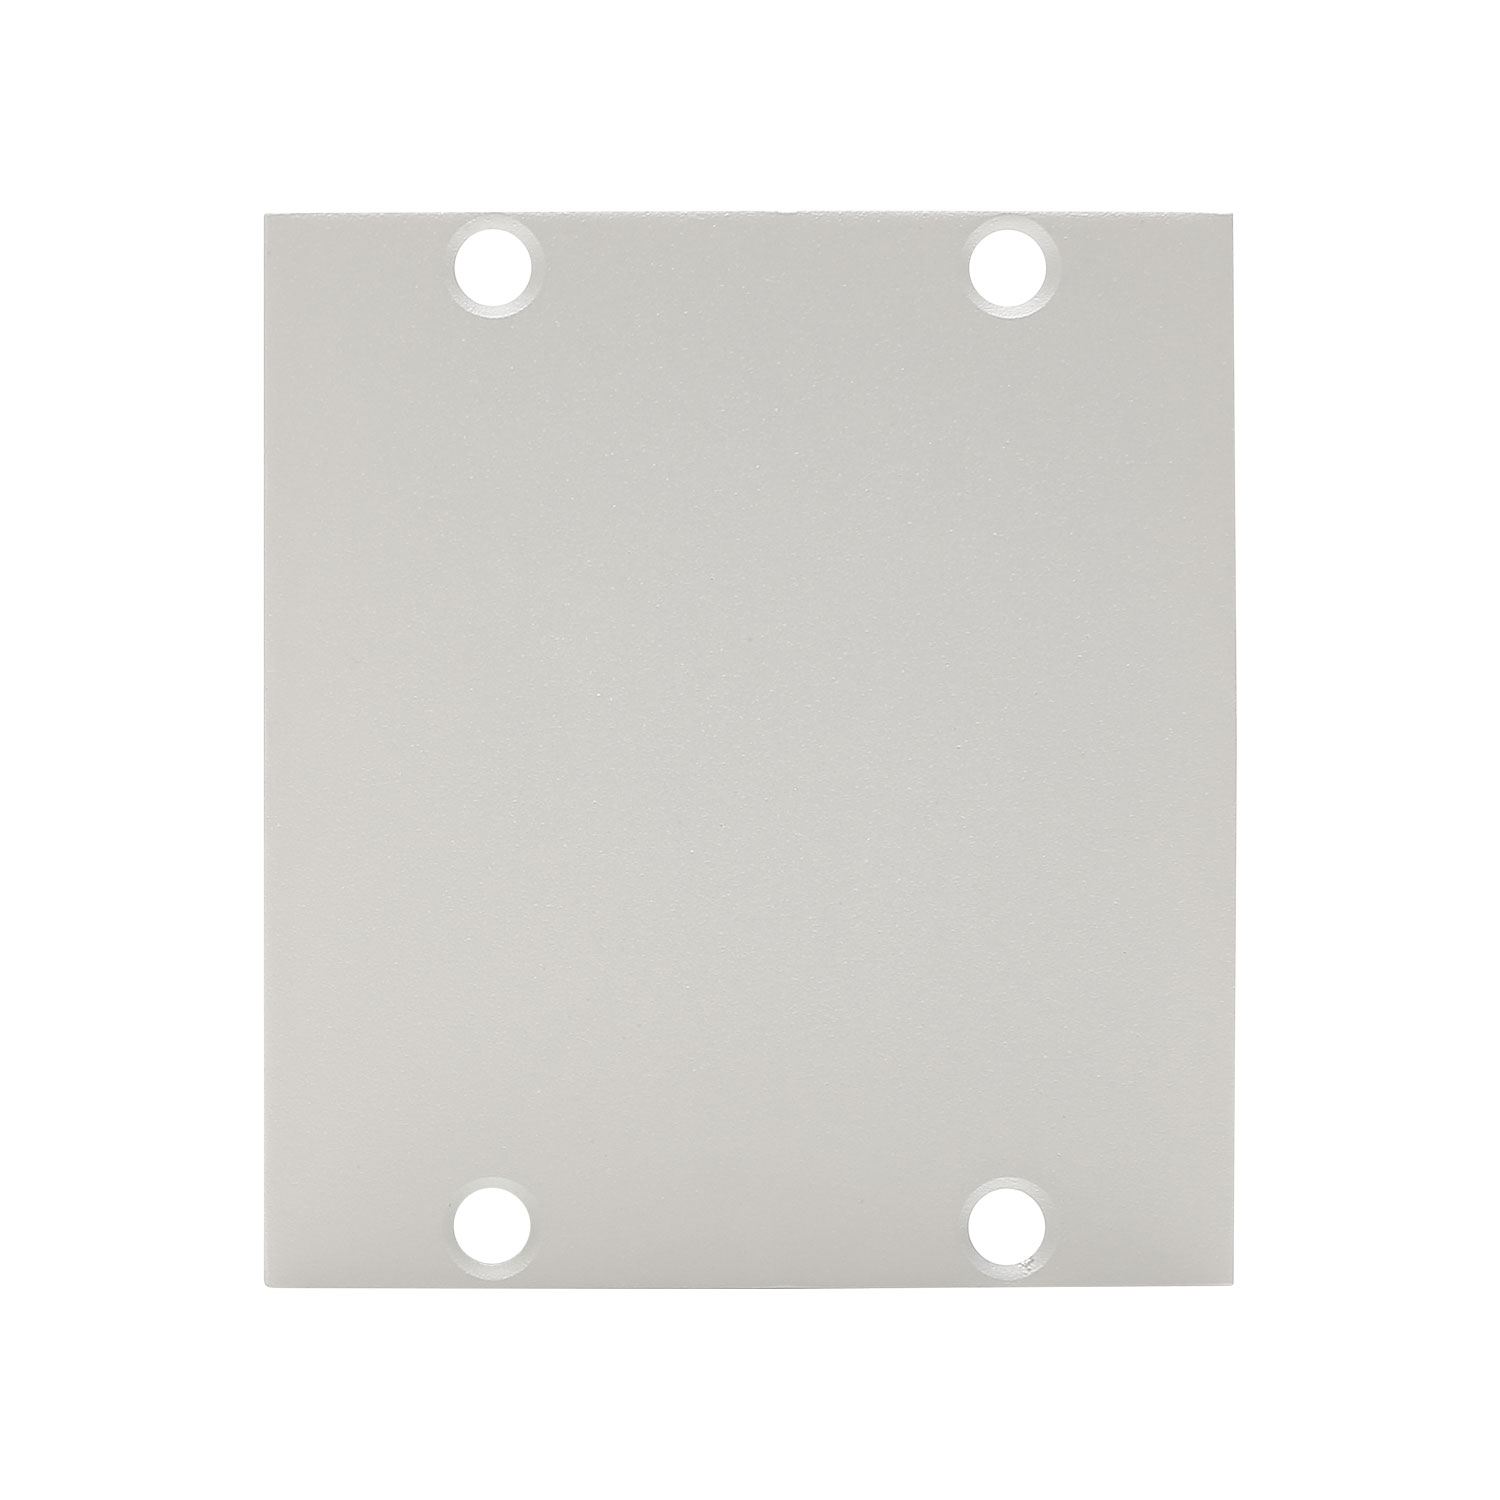 Side panel blank panel, 2 HE; depth: 80 mm for SYSBOXX, colour: white